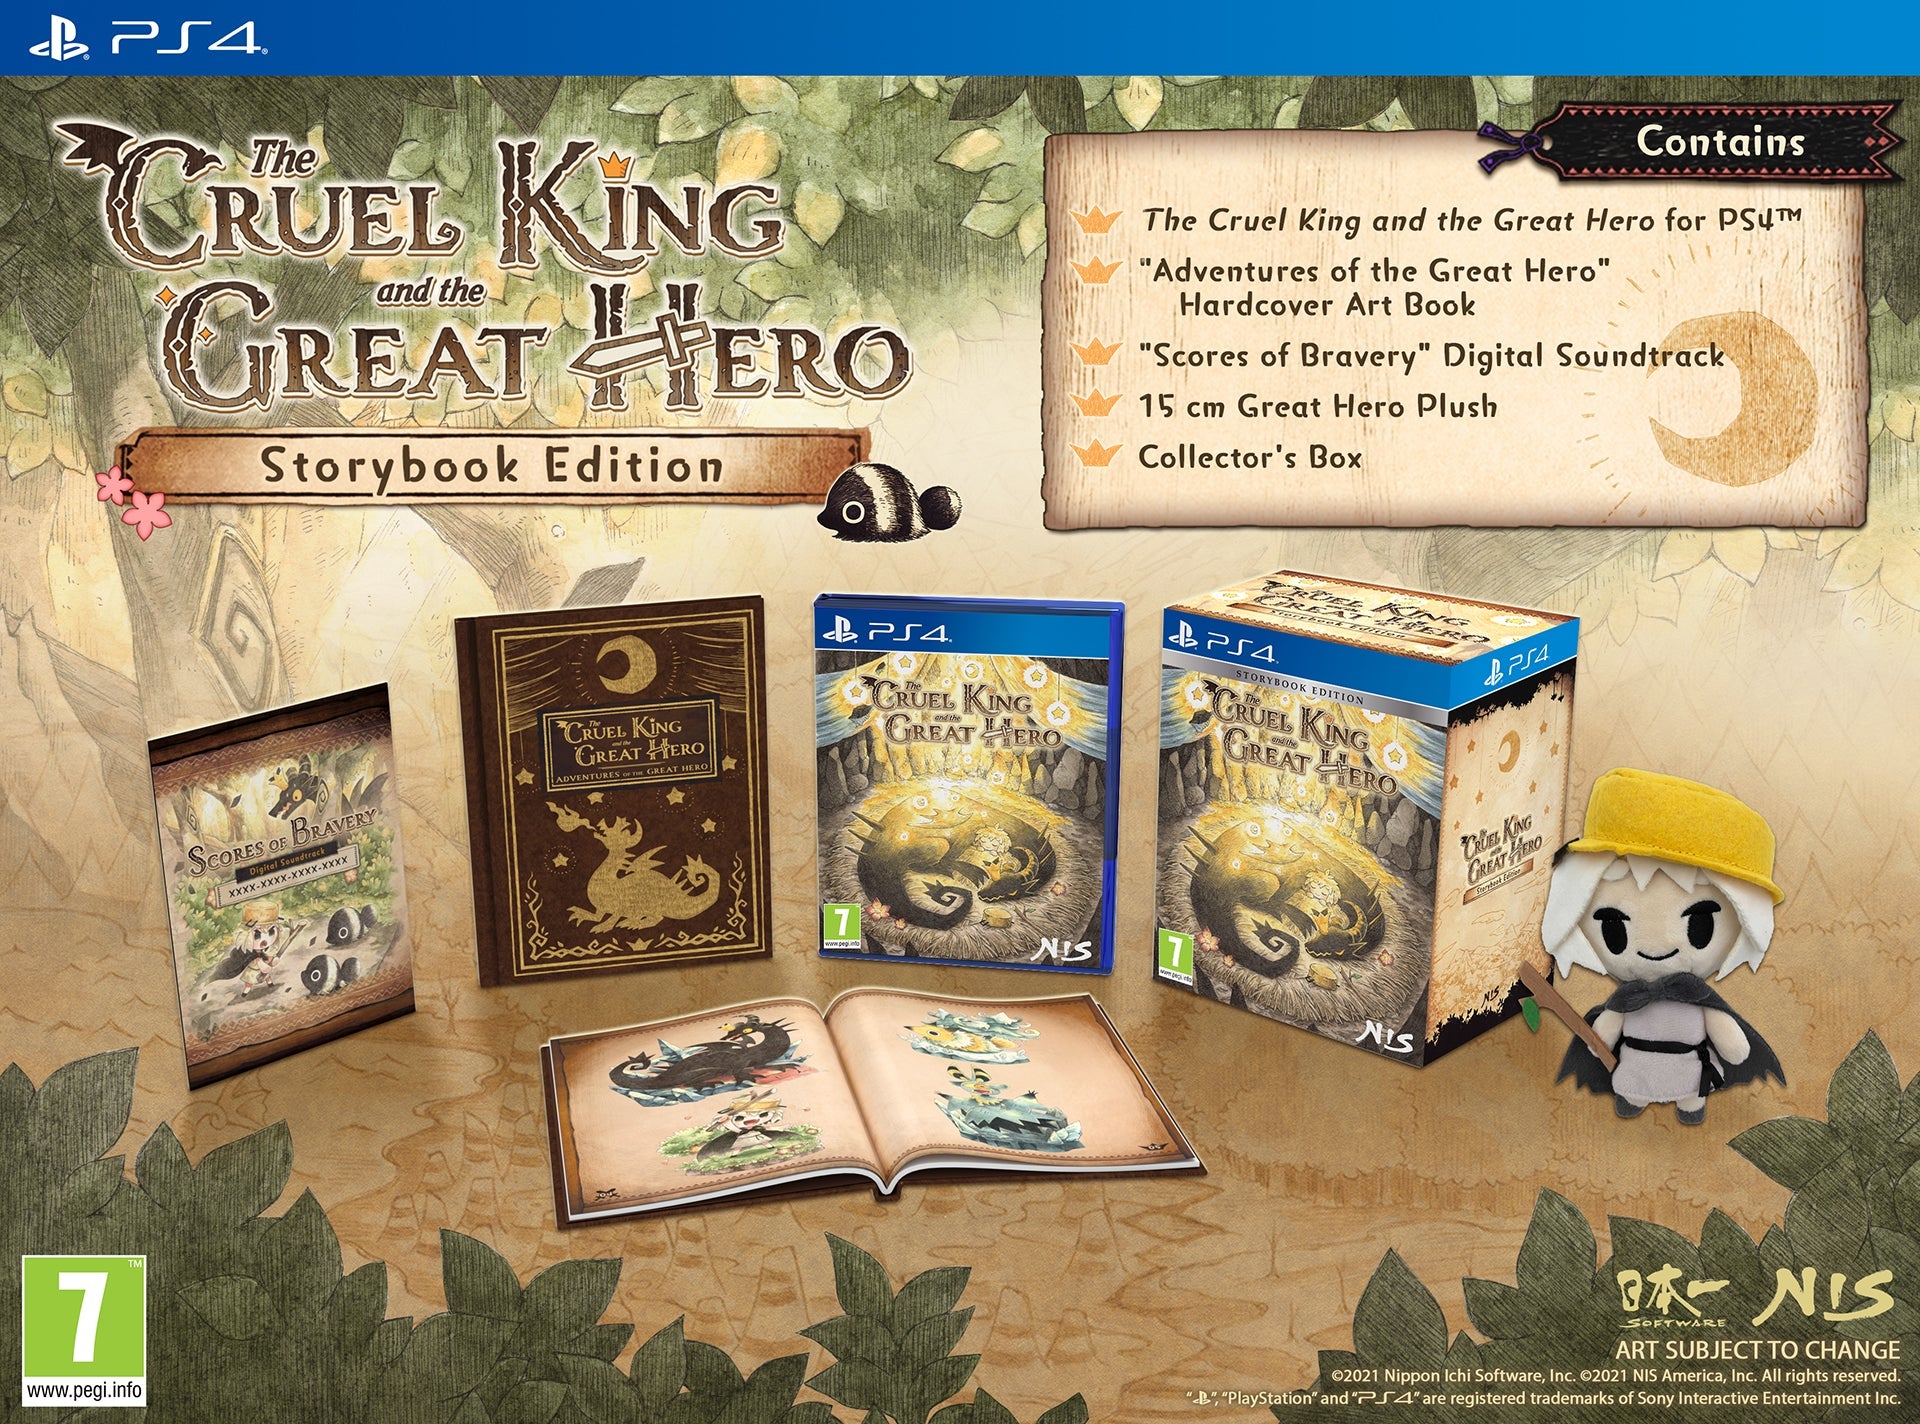 The Cruel King and the Great Hero - Storybook Edition - PS4®